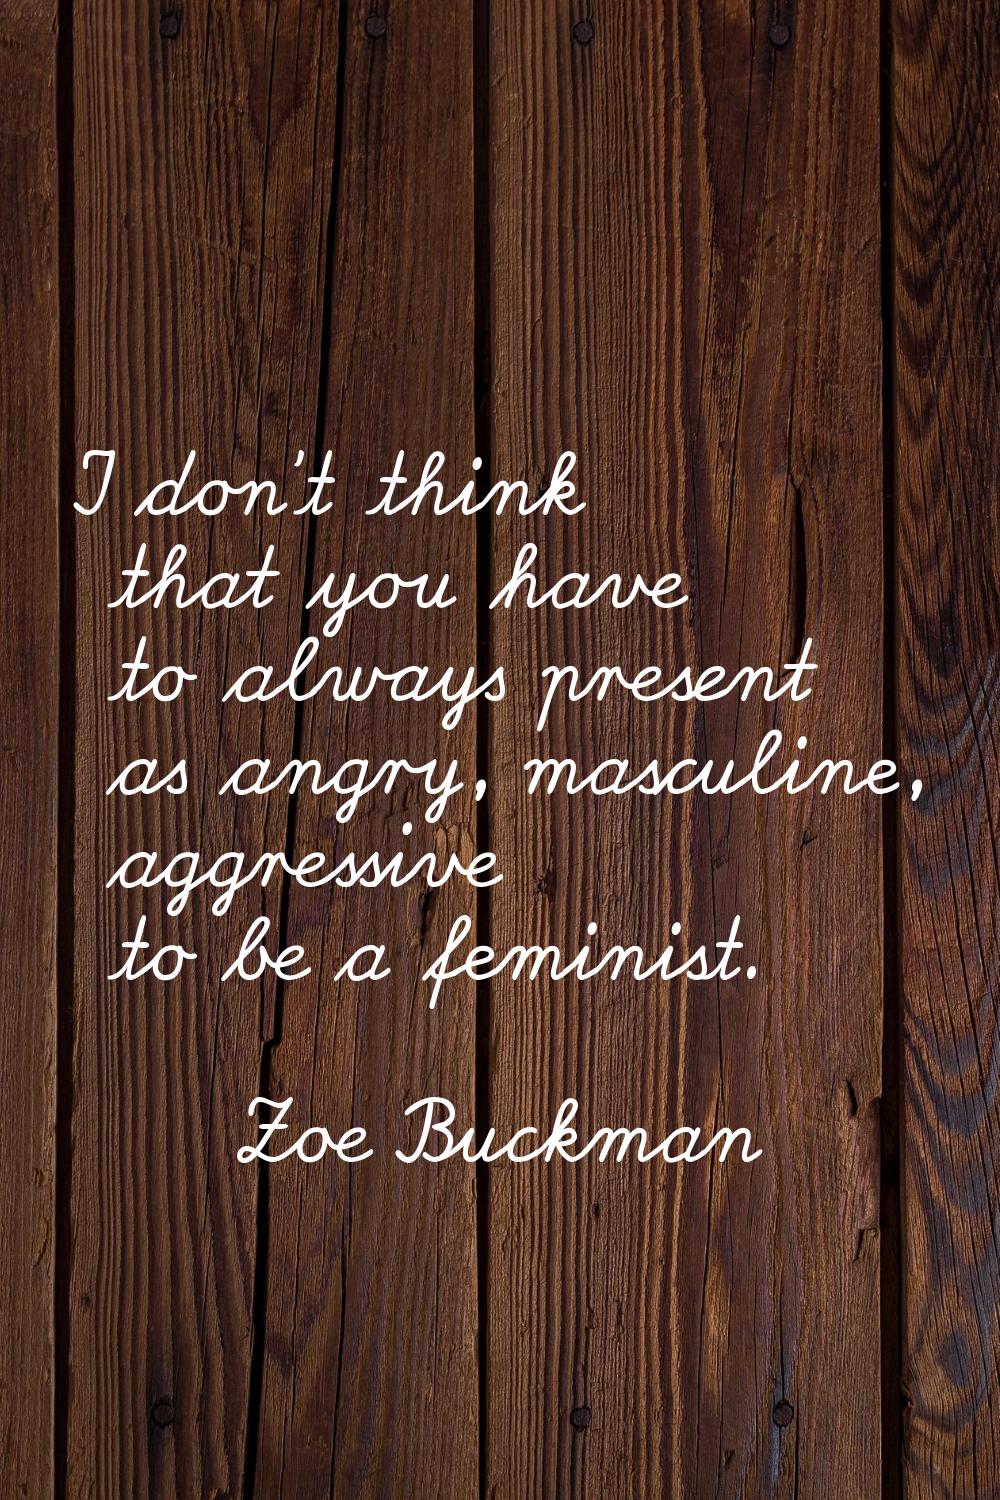 I don't think that you have to always present as angry, masculine, aggressive to be a feminist.